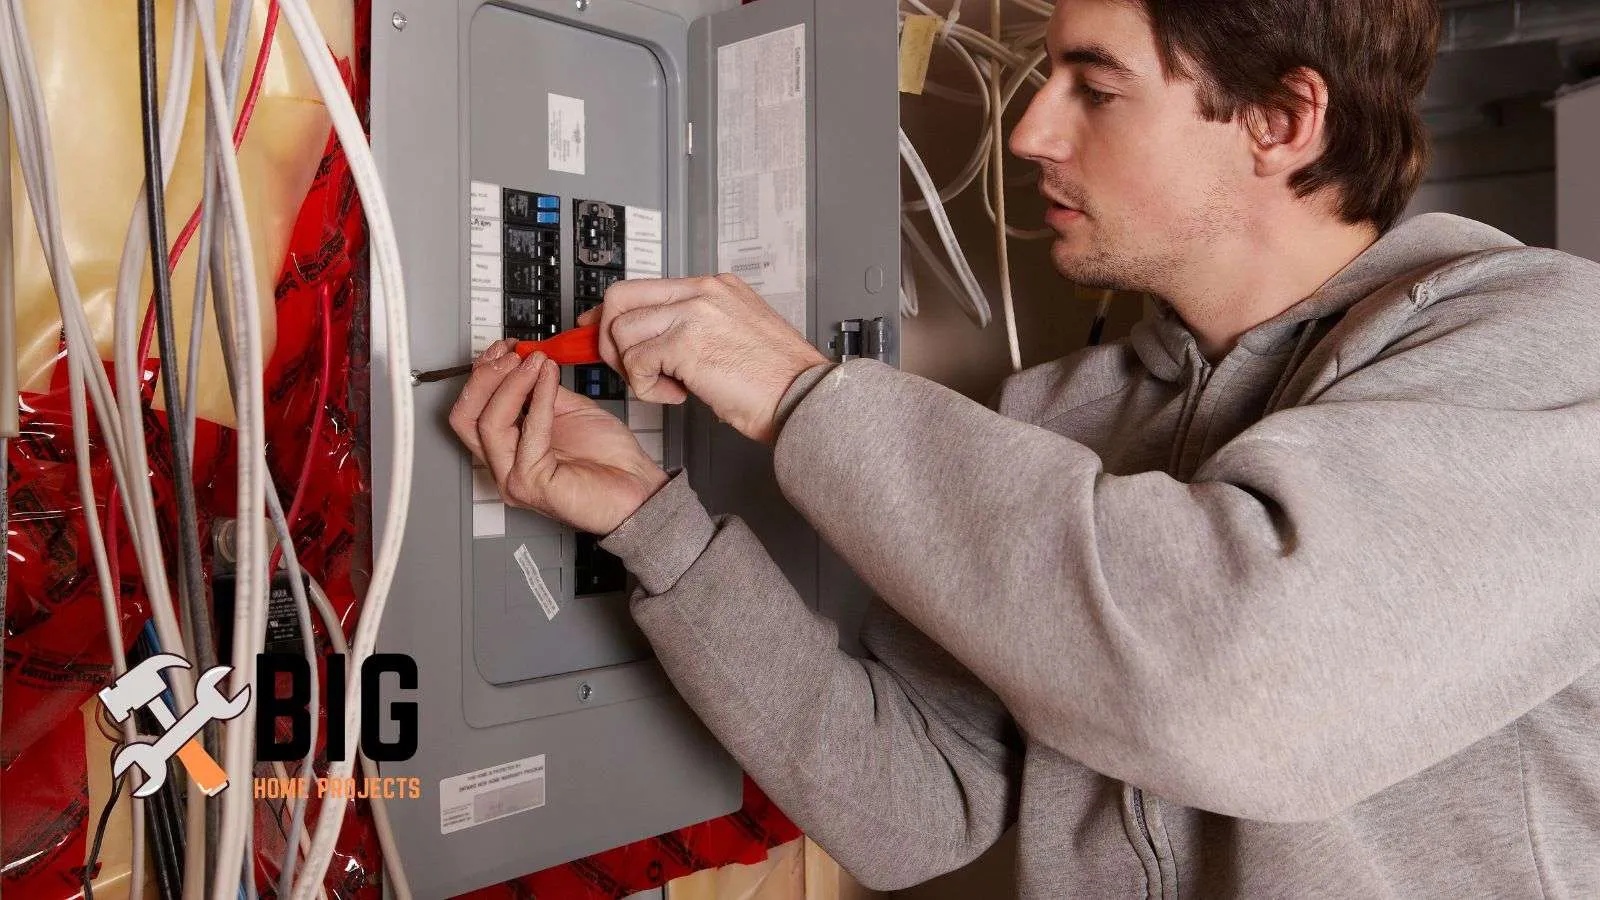 Man trying to upgrade electrical panel - bighomeprojects.com